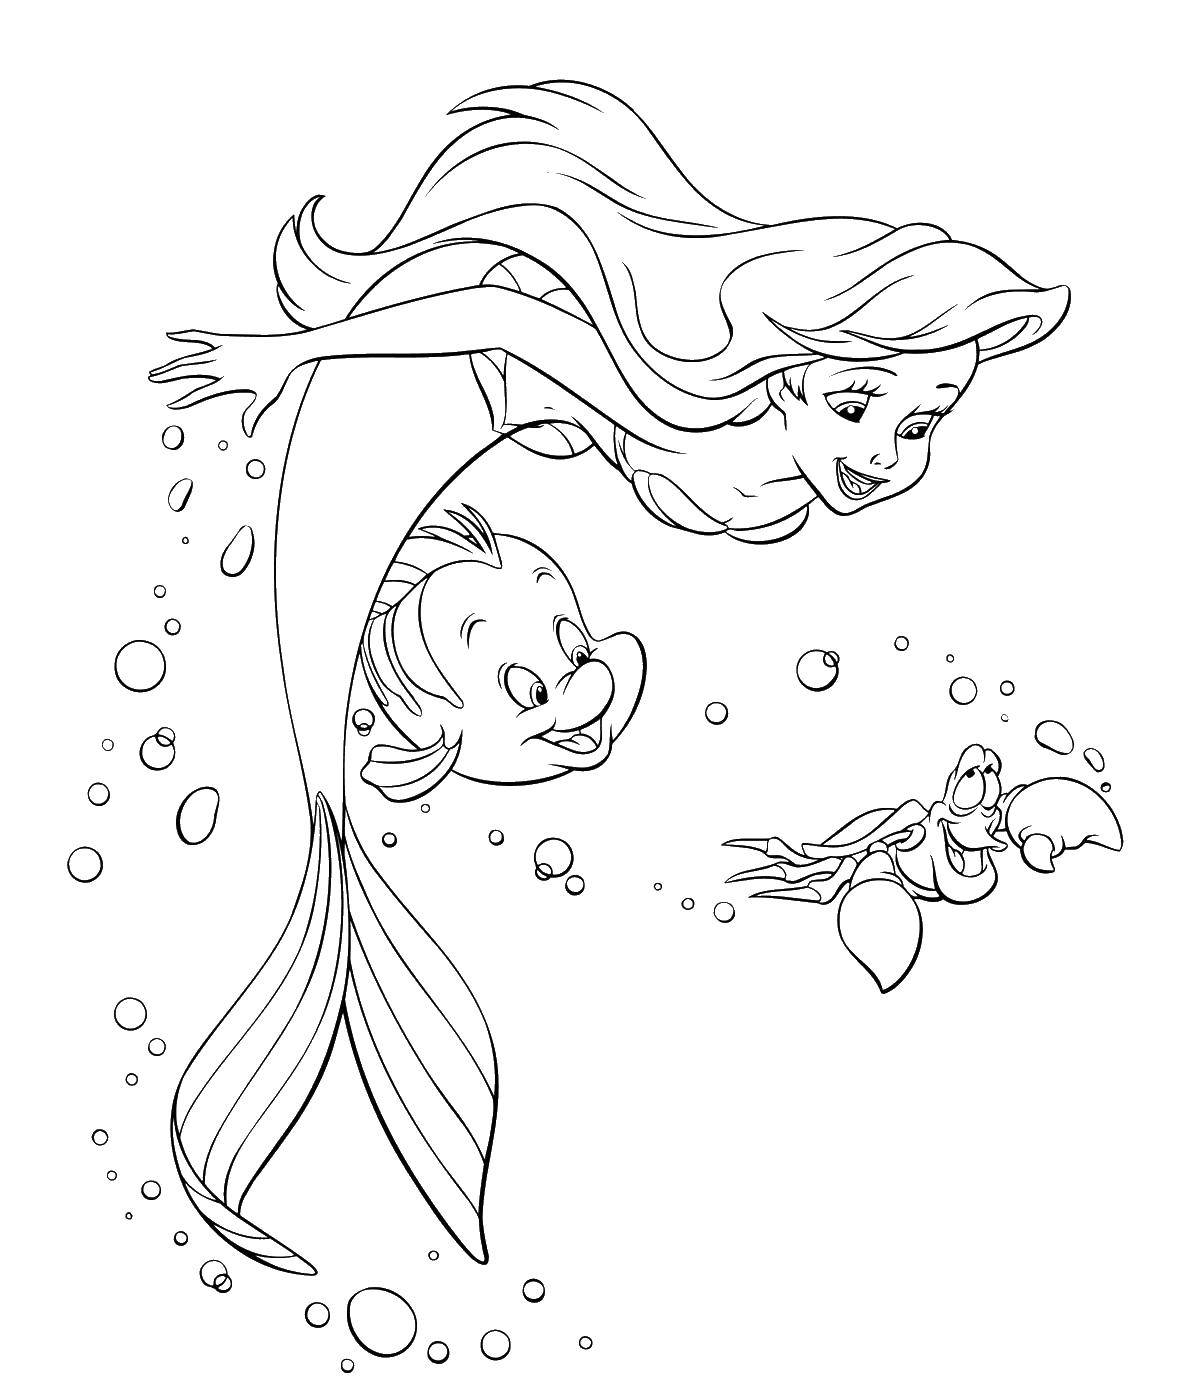 Coloring The little mermaid Ariel and flounder. Category Disney cartoons. Tags:  Disney, the little mermaid, Ariel.